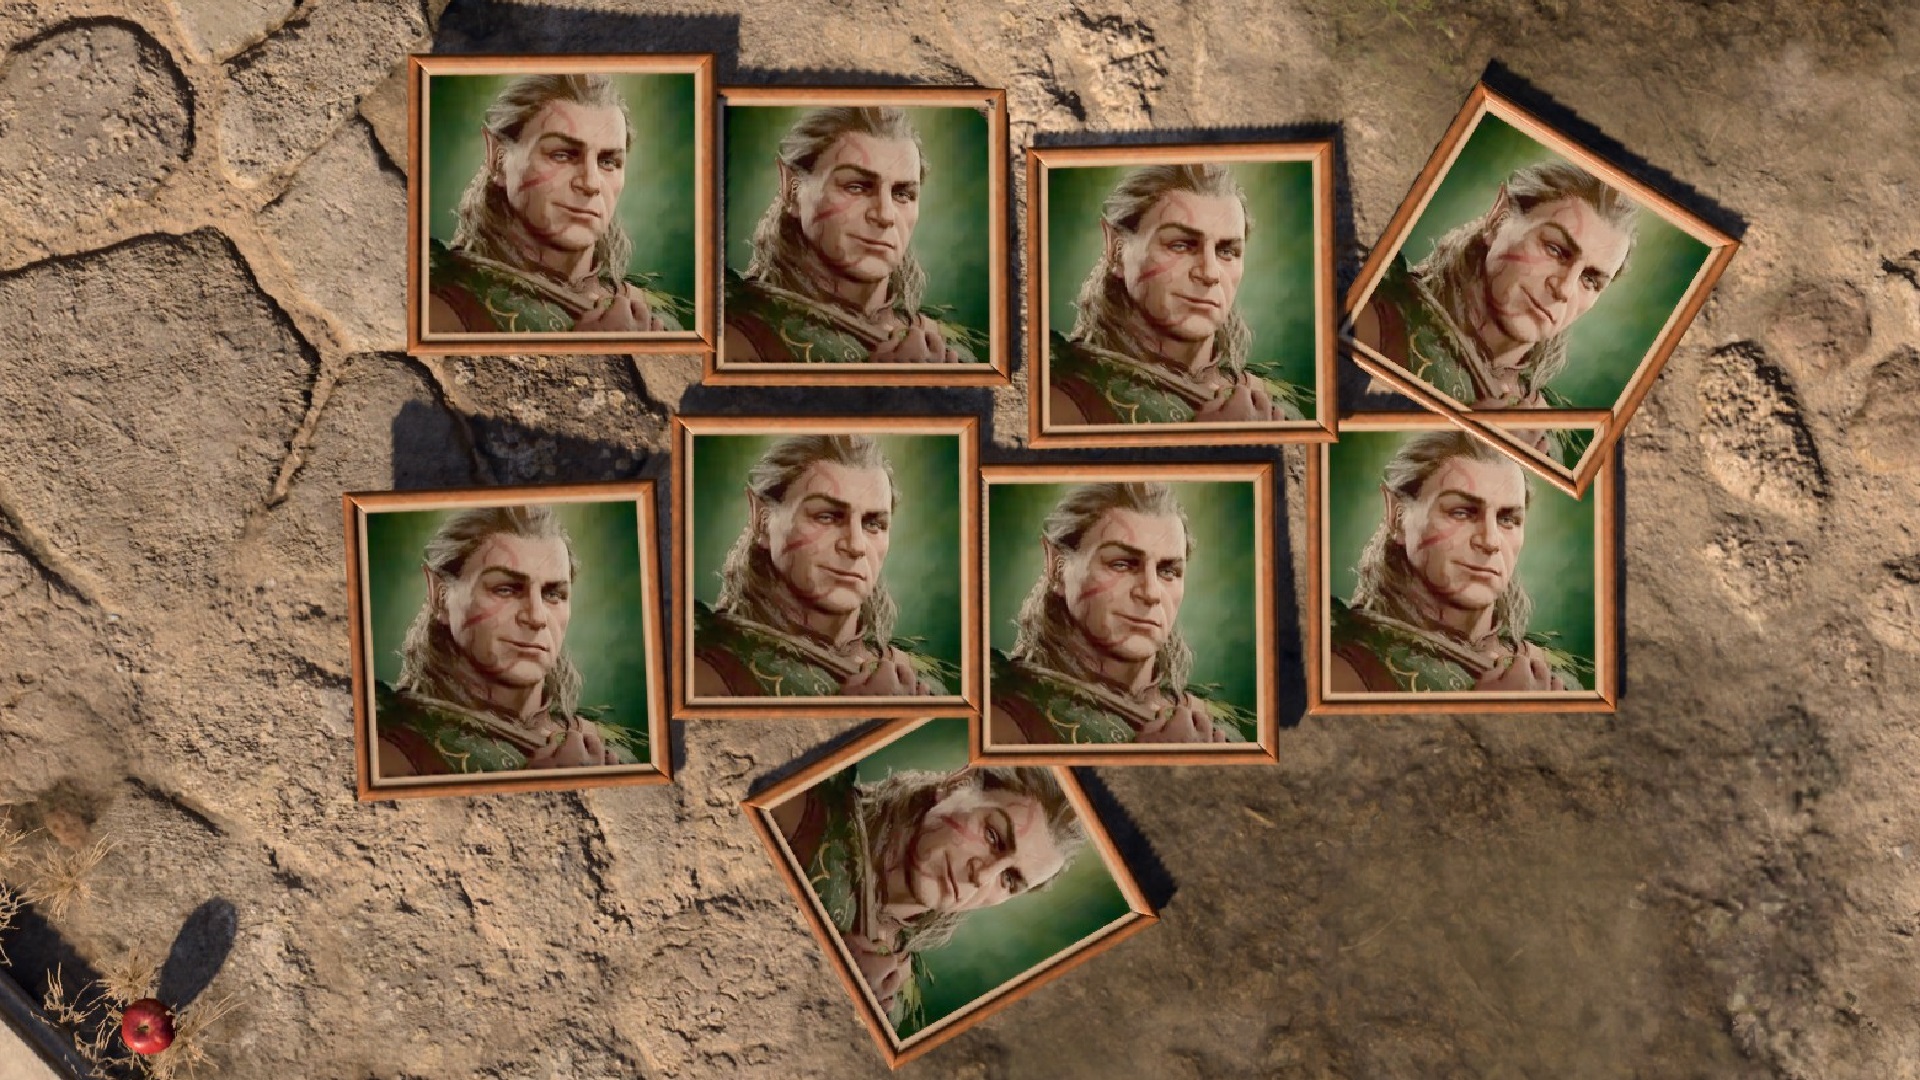  Baldur's Gate 3's NPC painter has a mysterious mind: I asked for a portrait of myself and he gave me 9 paintings of my jacked druid companion instead 